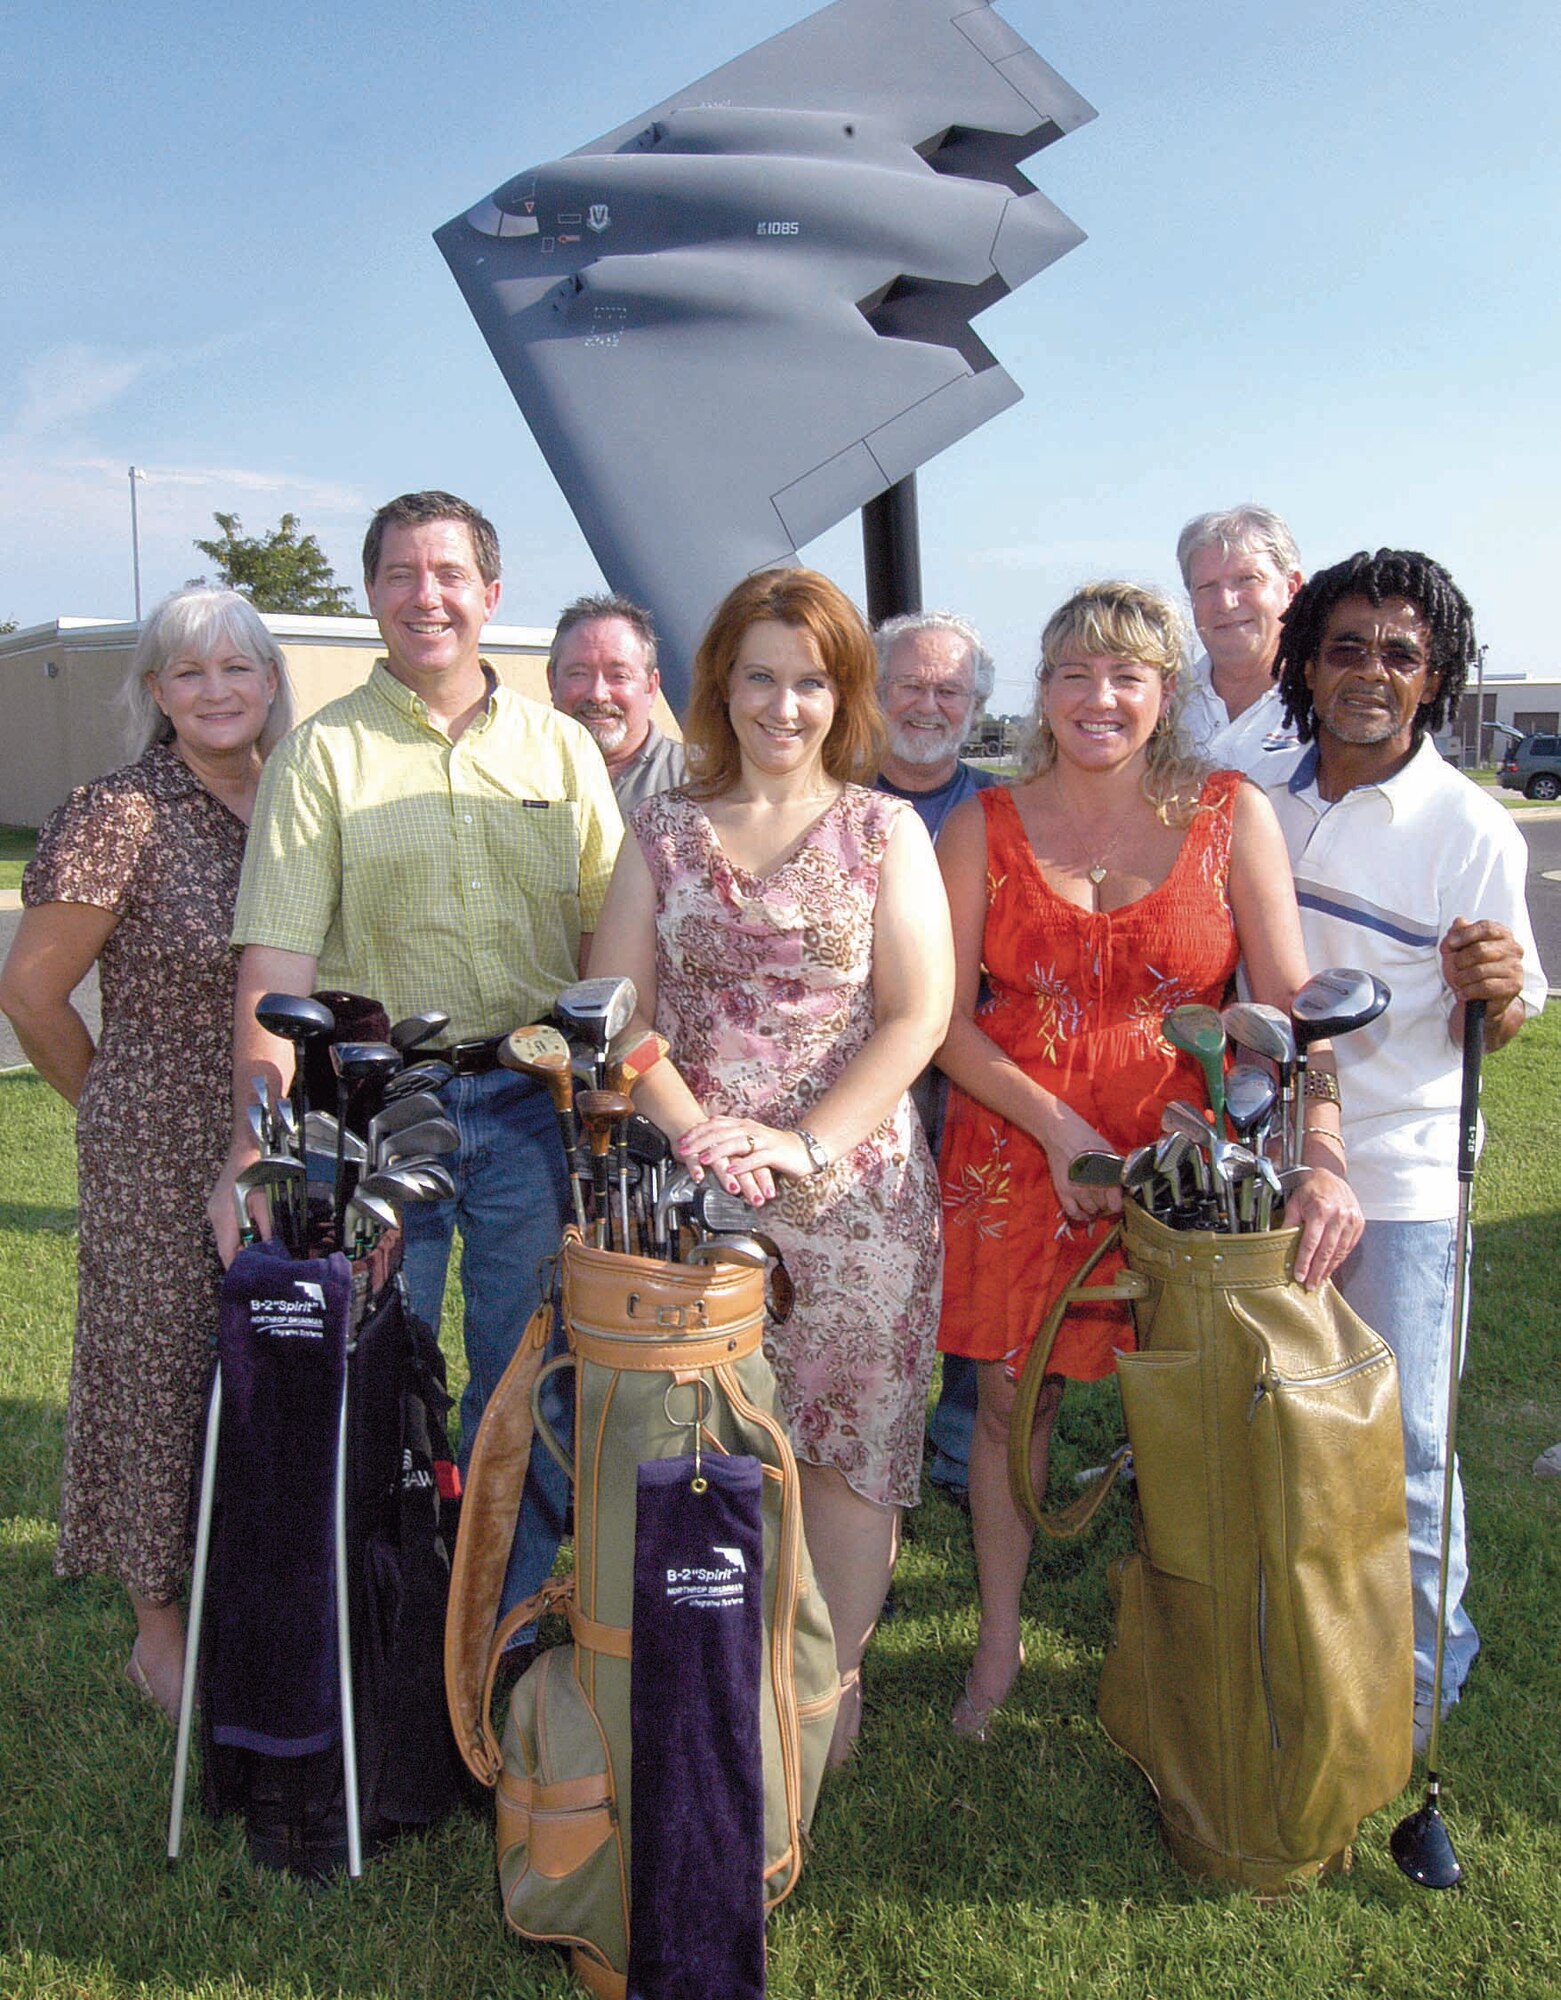 B-2 personnel rallied after learning a coworker’s deployed husband and other Airmen shared one broken golf club during down time.  Angela Carr, center, is surrounded by coworkers and a few of the golf supplies going overseas.  From left are; Diane Elliott, Kirk Johnson, Tommy Mills, Charlie Hogan, Tina Croswell, Randy Lynn and Gary Kinard.  (Air Force photo by Margo Wright)
